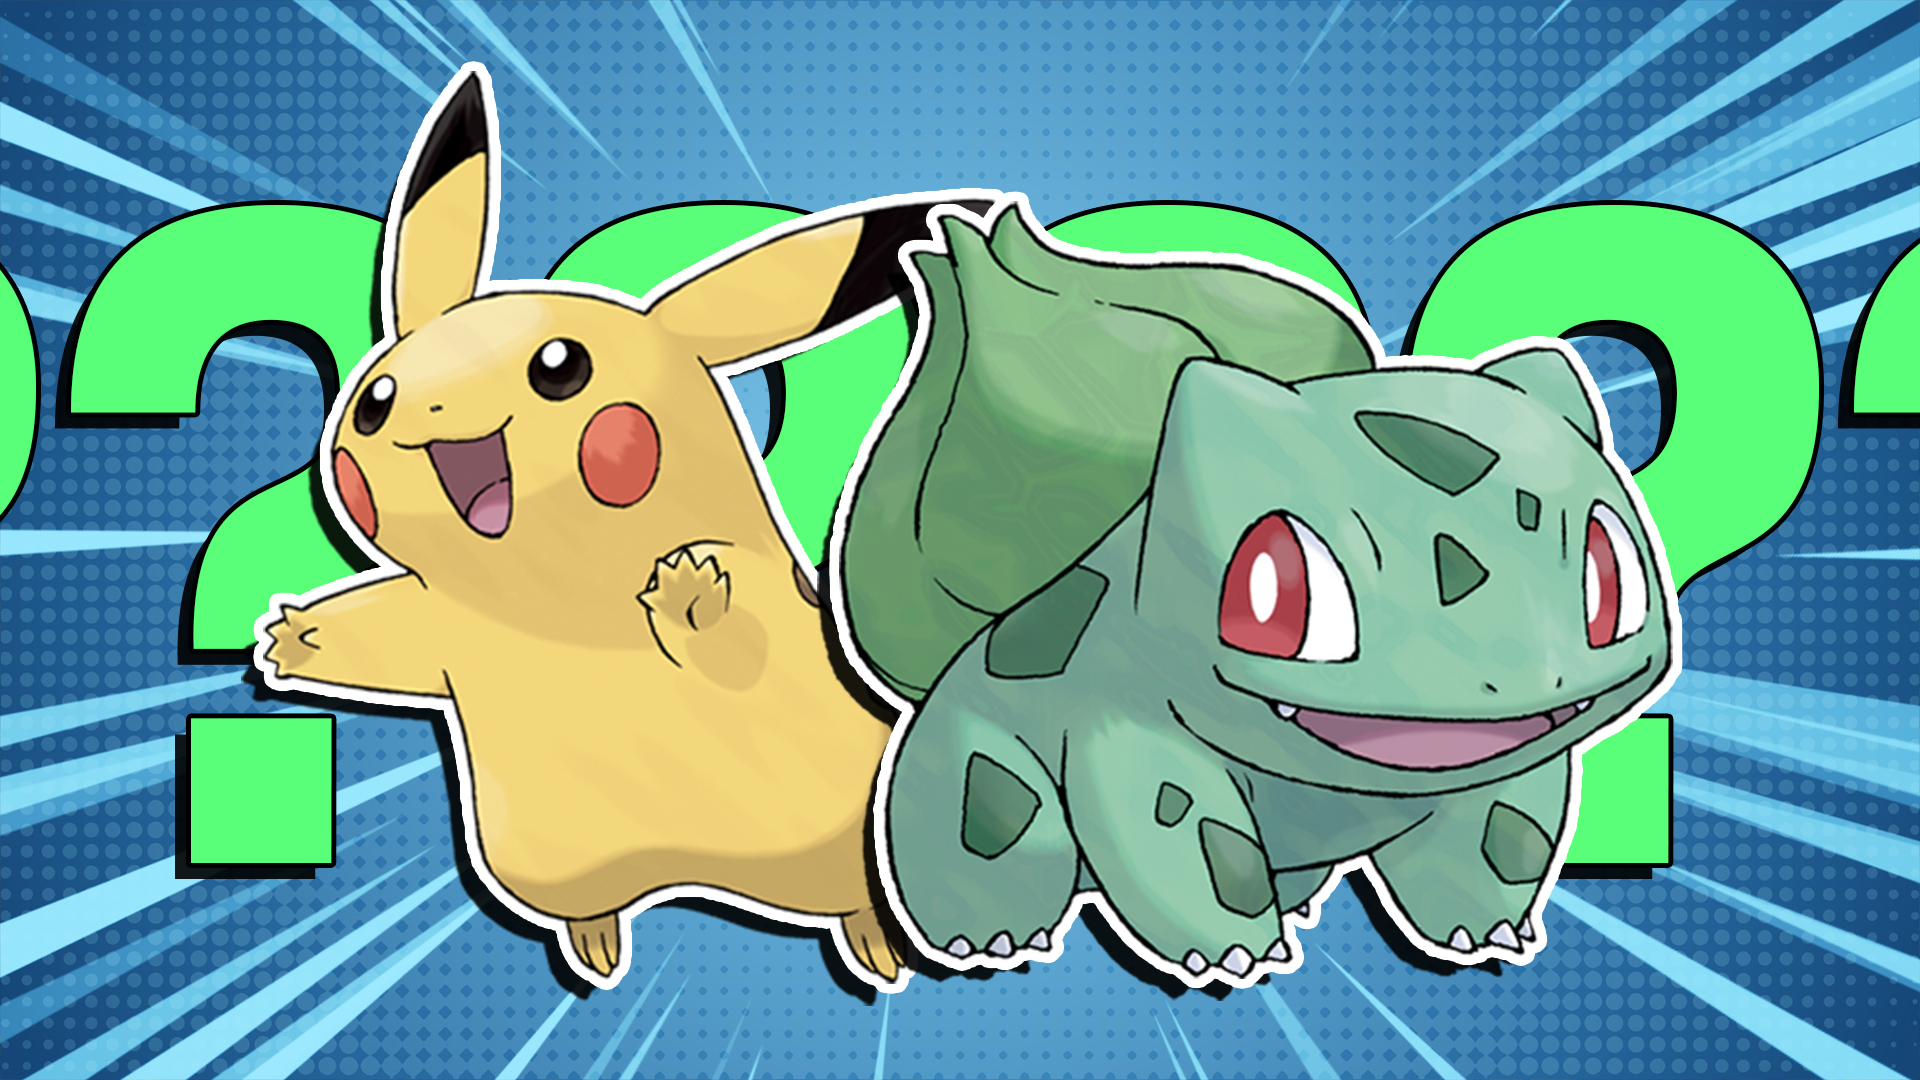 Quiz: Do You Know The Meaning Behind These Pokémon Names?